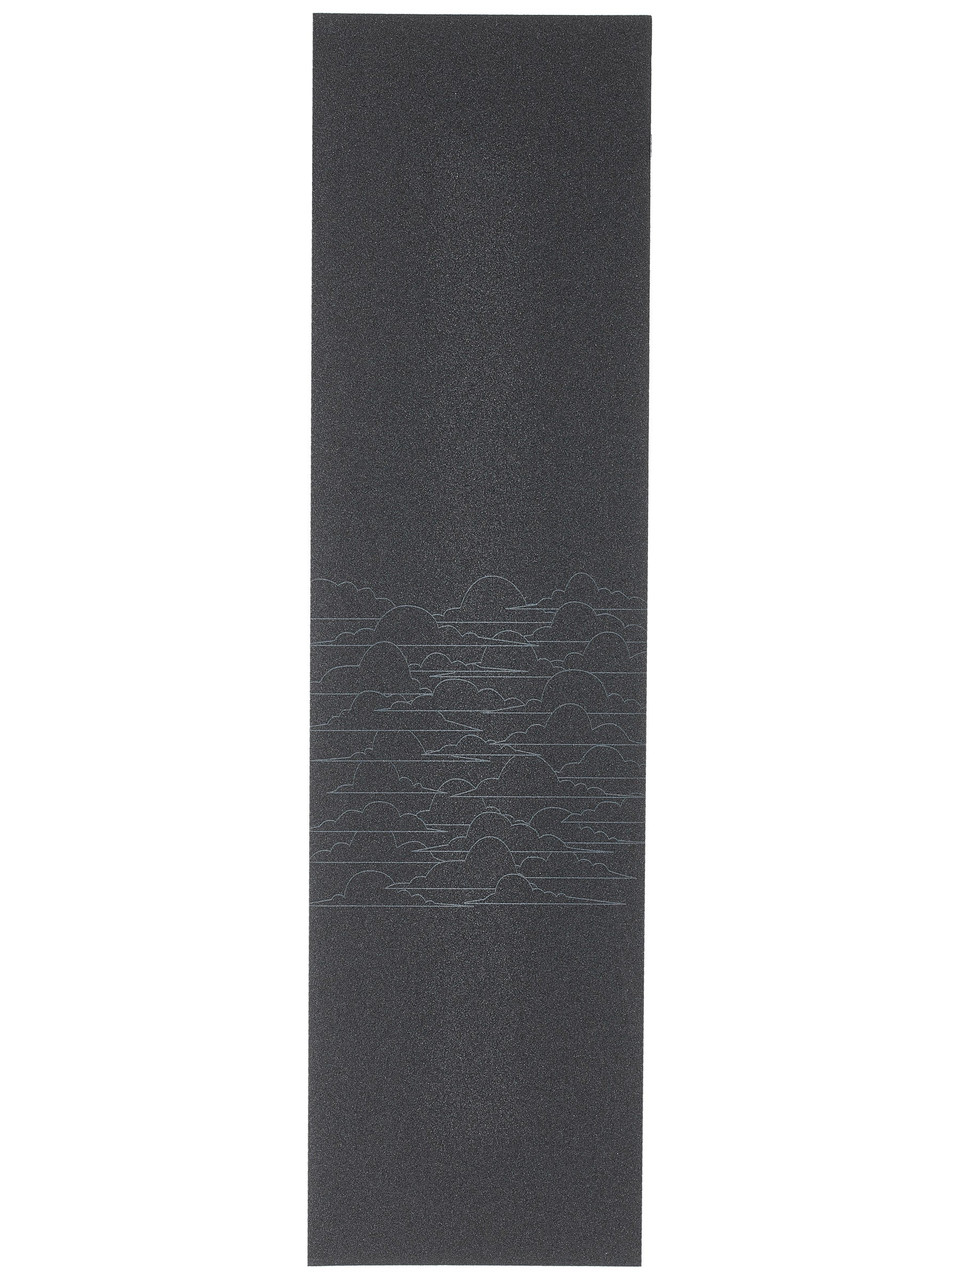 Jessup Ultra Grip Tape Sheet Partly Cloudy 9x33